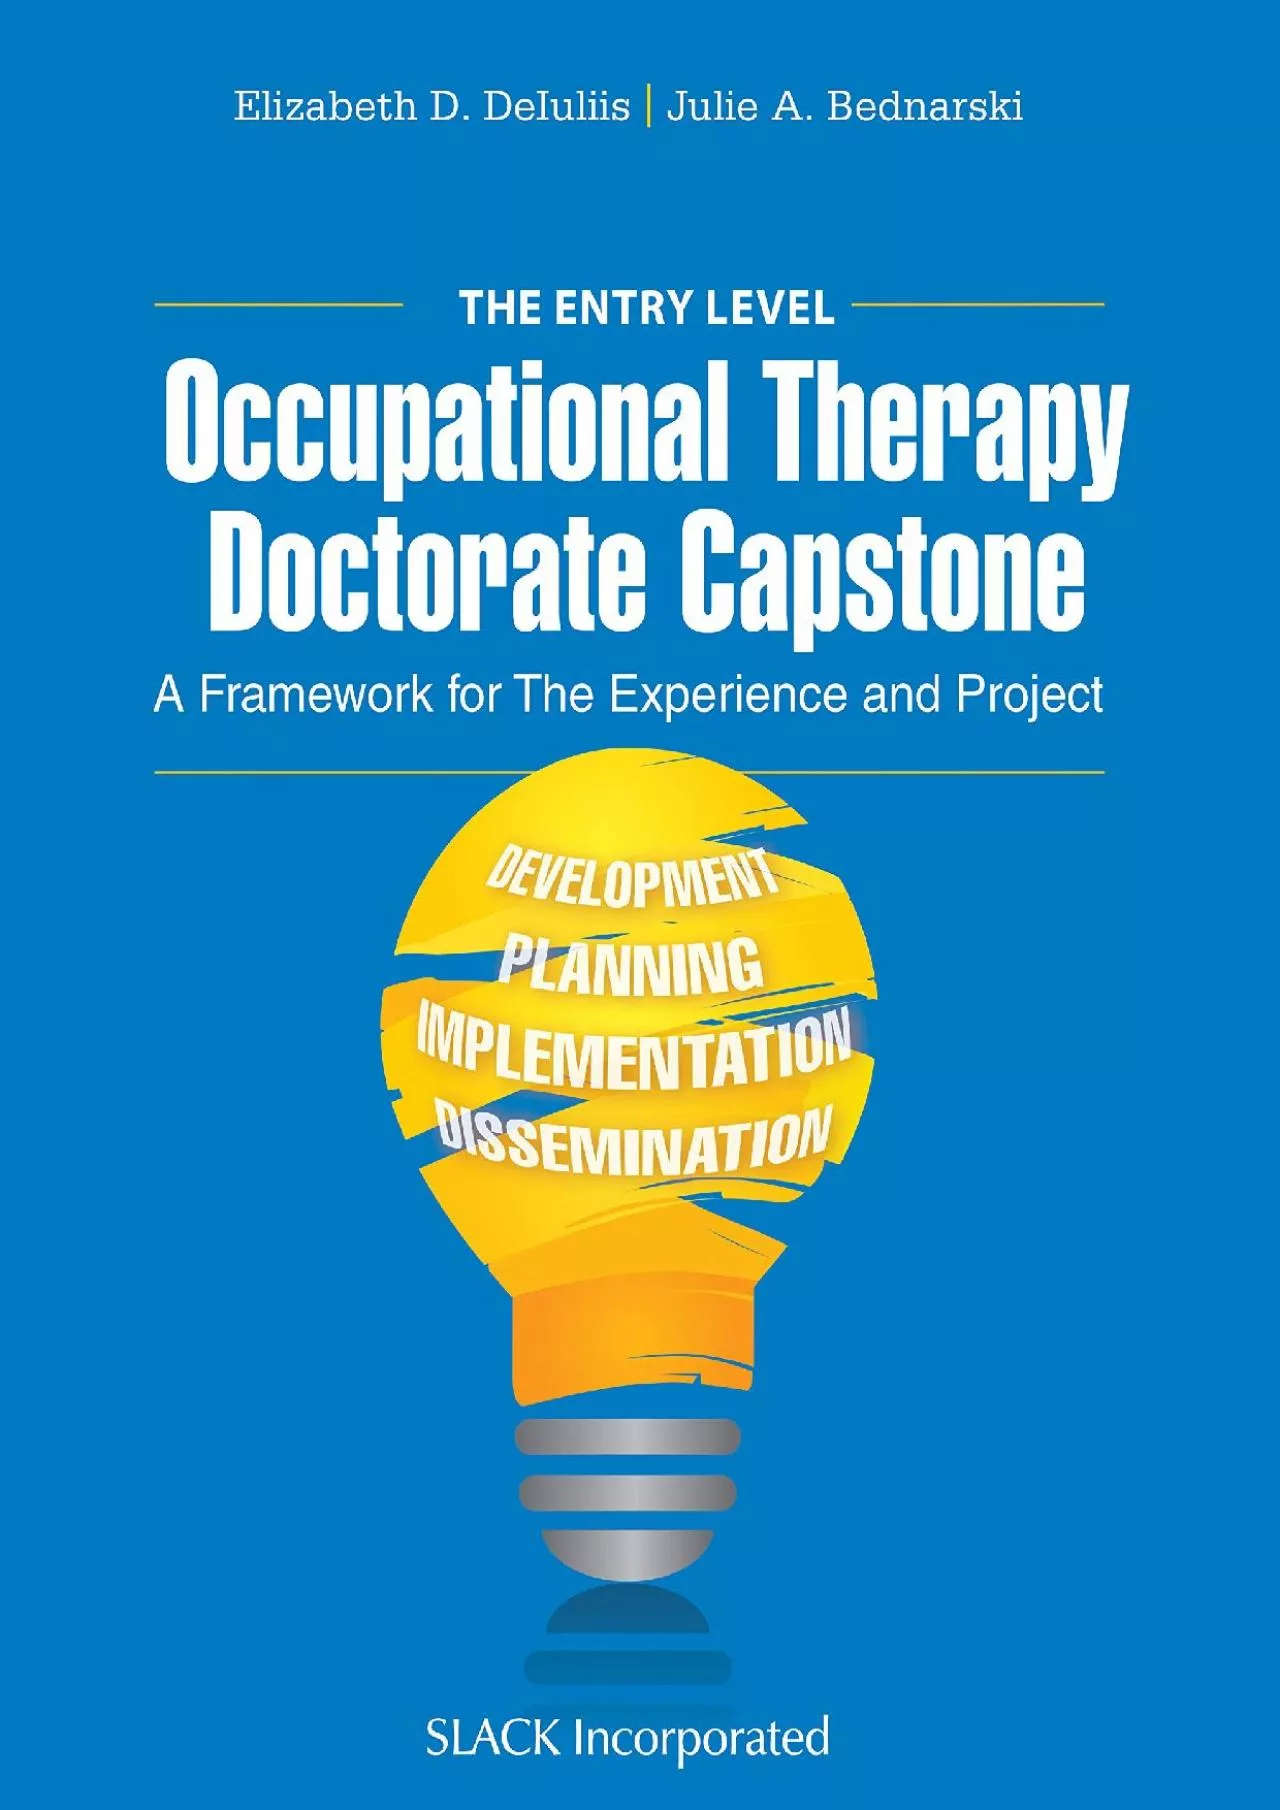 (BOOK)-The Entry Level Occupational Therapy Doctorate Capstone: A Framework for the Experience